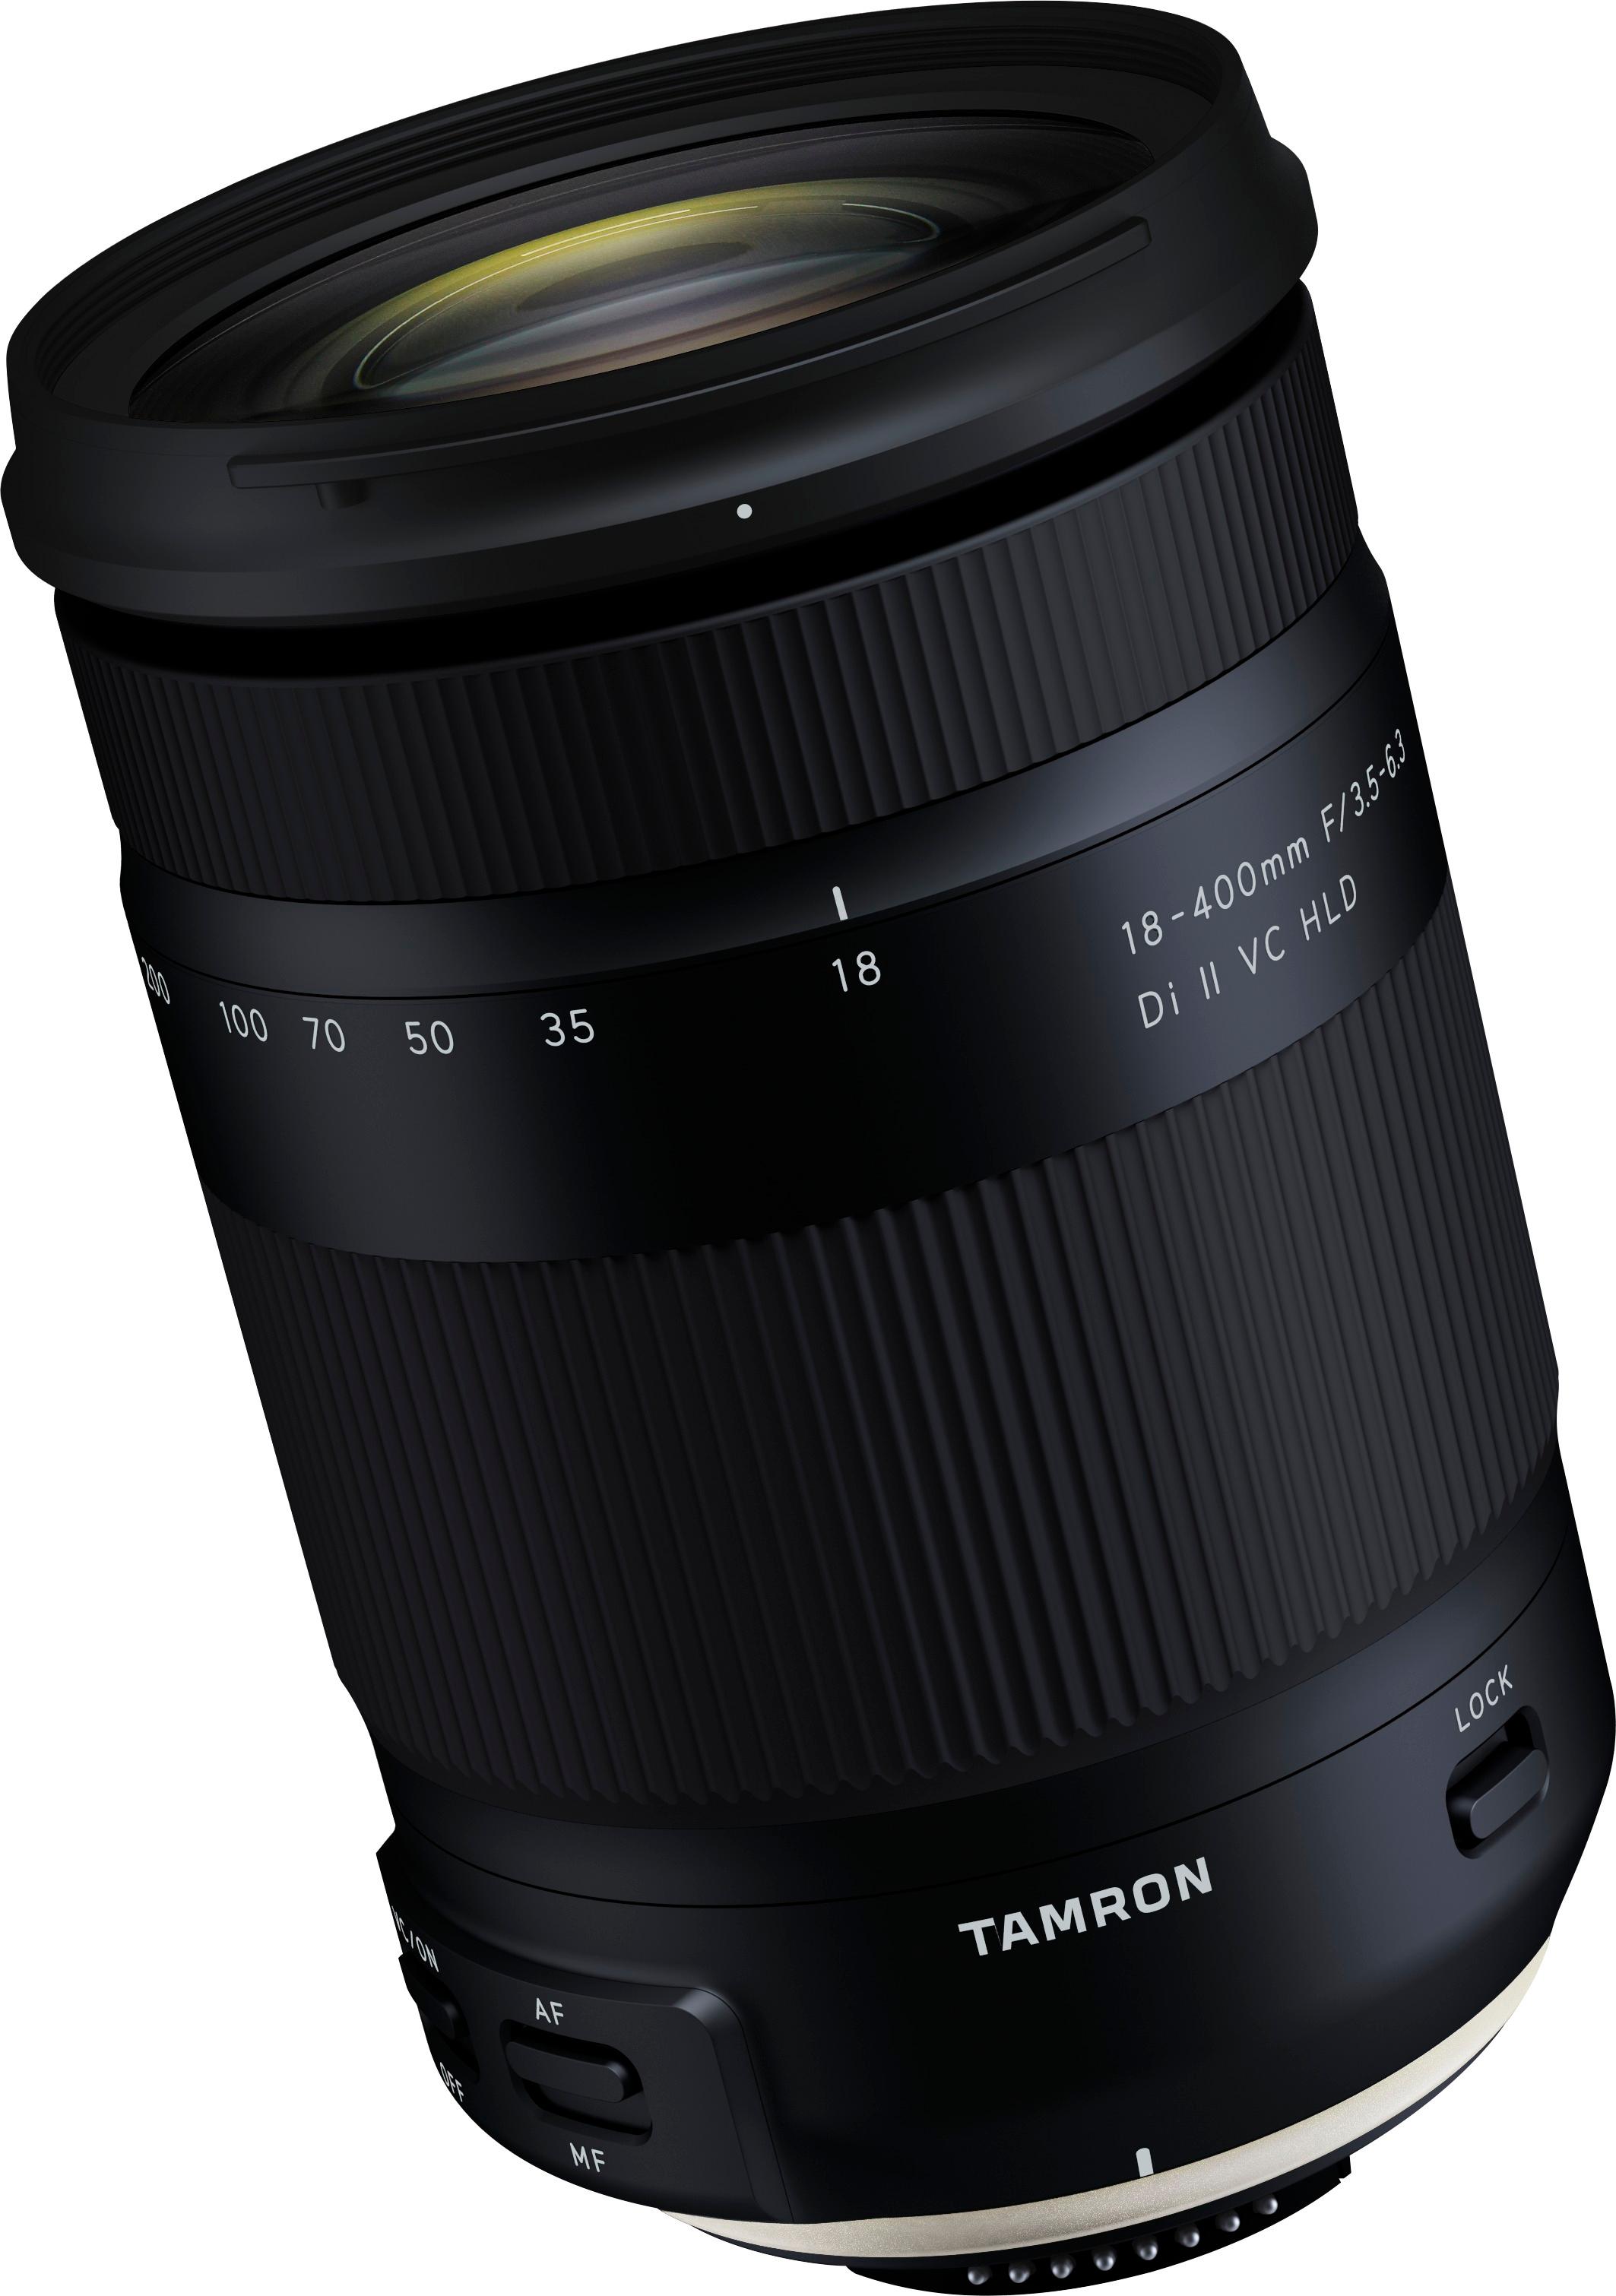 Angle View: Tamron - 18-400mm F/3.5-6.3 Di II VC HLD All-In-One Telephoto Lens for Nikon APS-C DSLR Cameras - Black